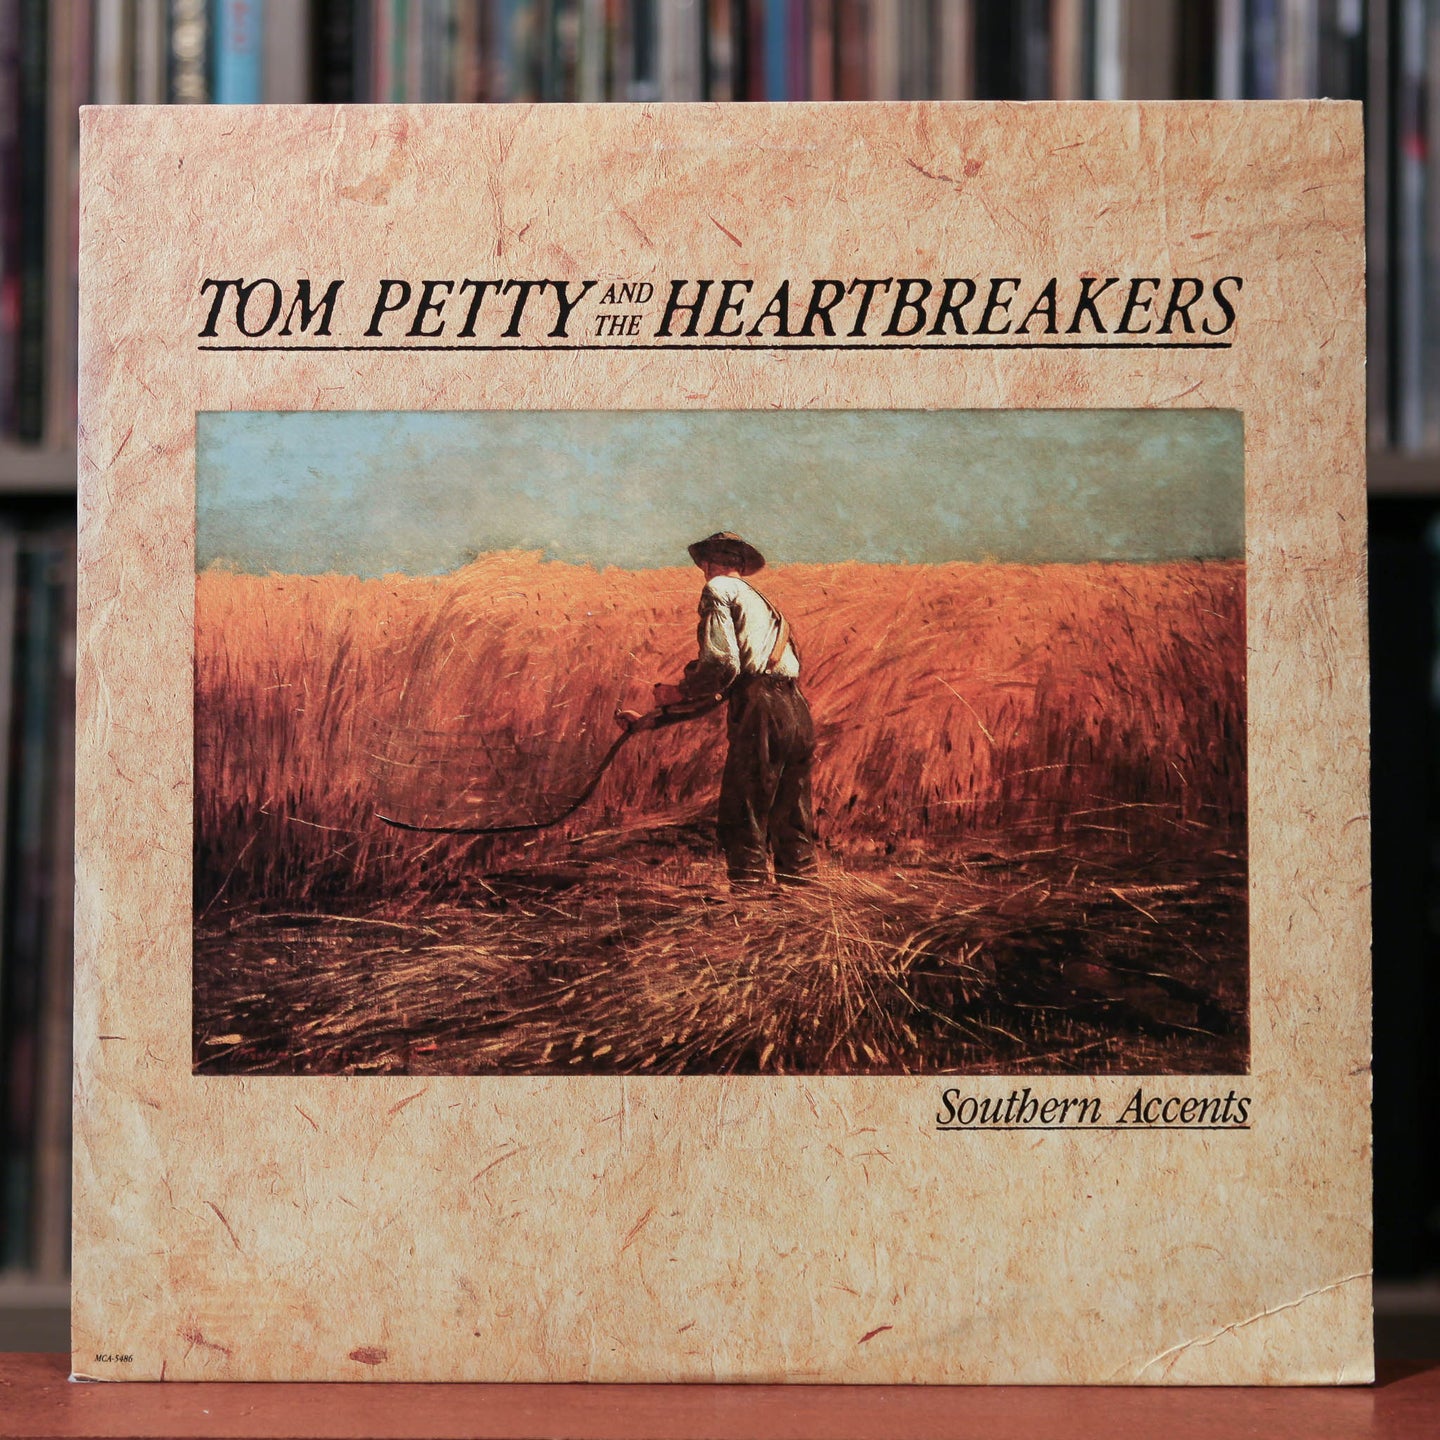 Tom Petty - Southern Accents - 1985 MCA, VG+/VG+